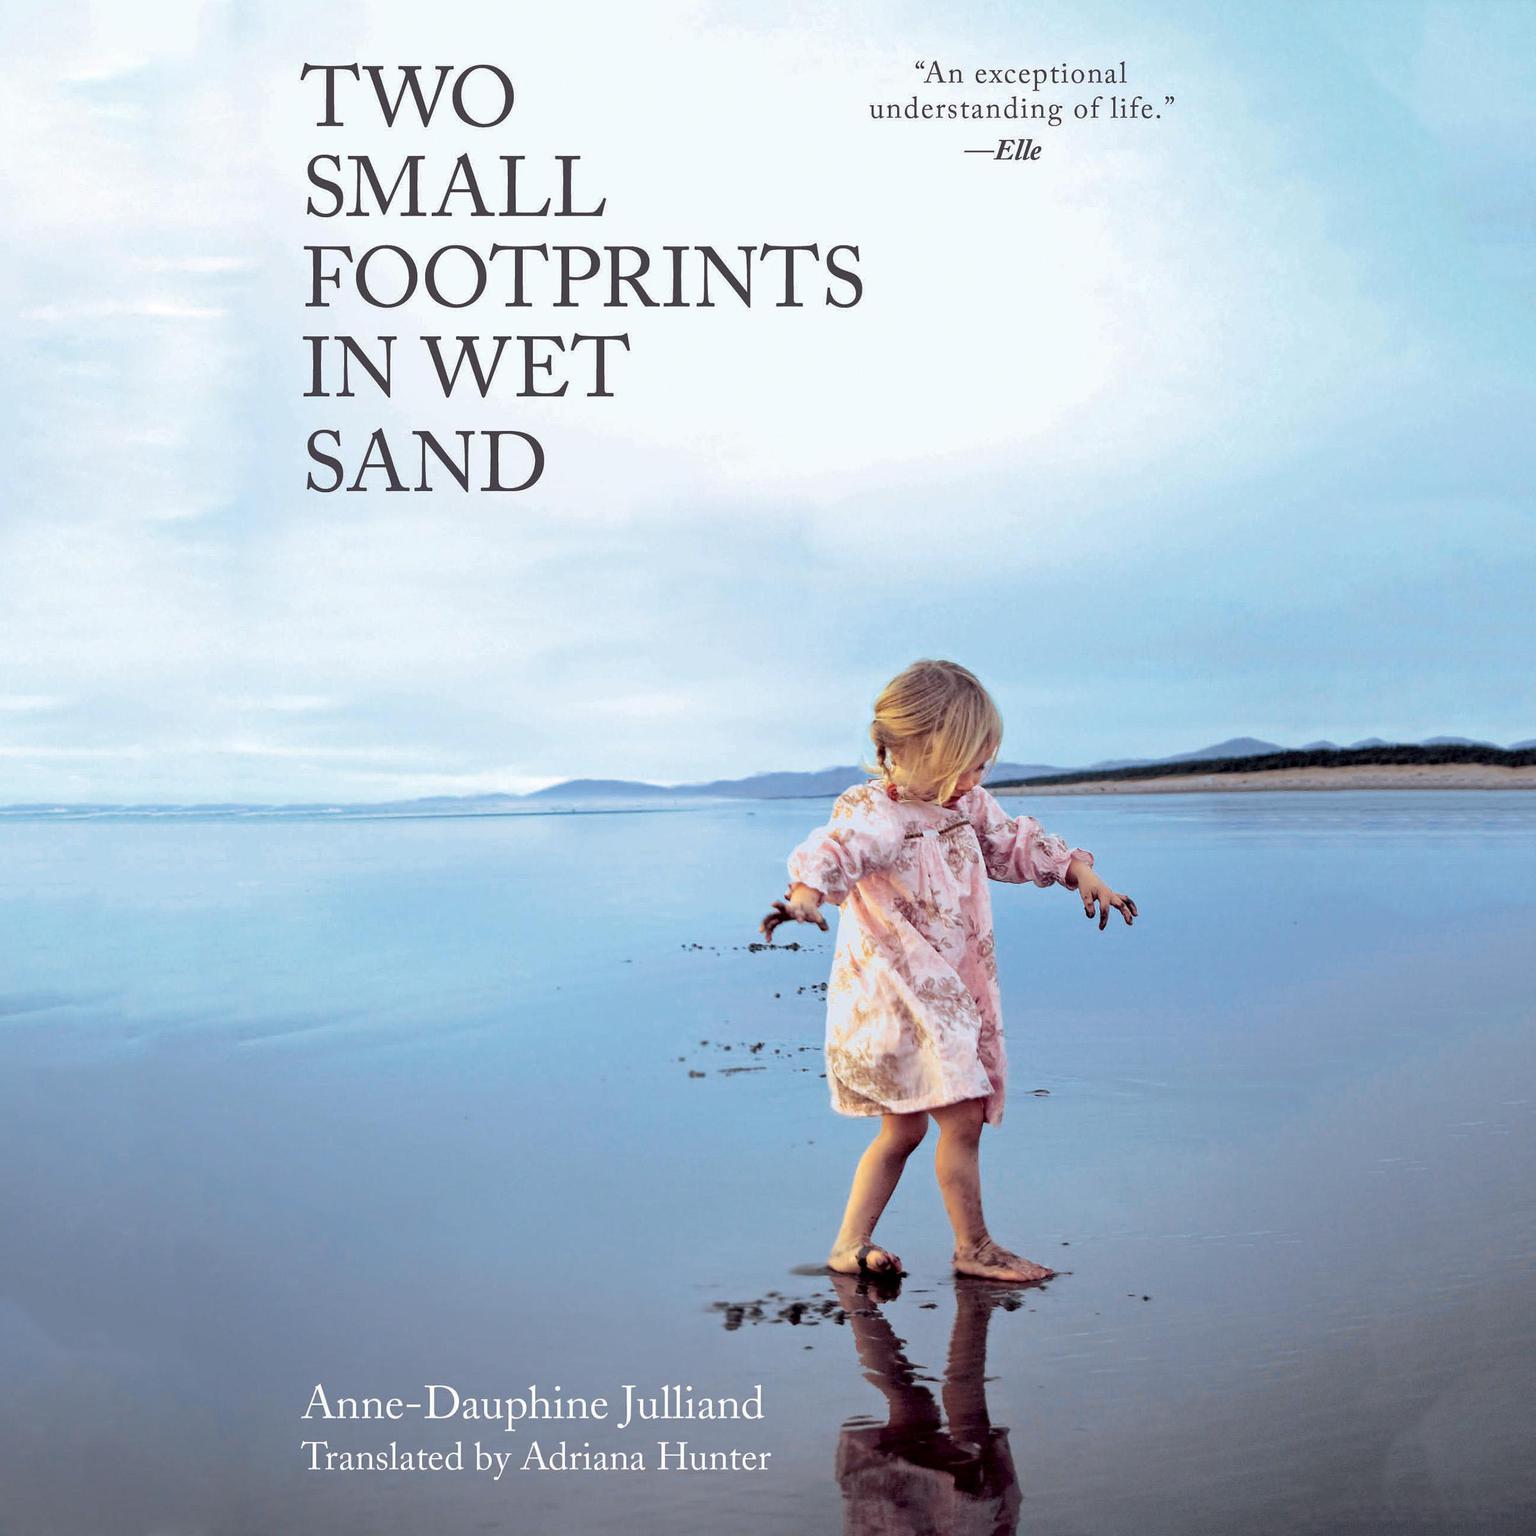 Two Small Footprints in Wet Sand: The Uplifting True Story of a Mothers Brave Quest to Save Her Daughter Audiobook, by Anne-Dauphine Julliand